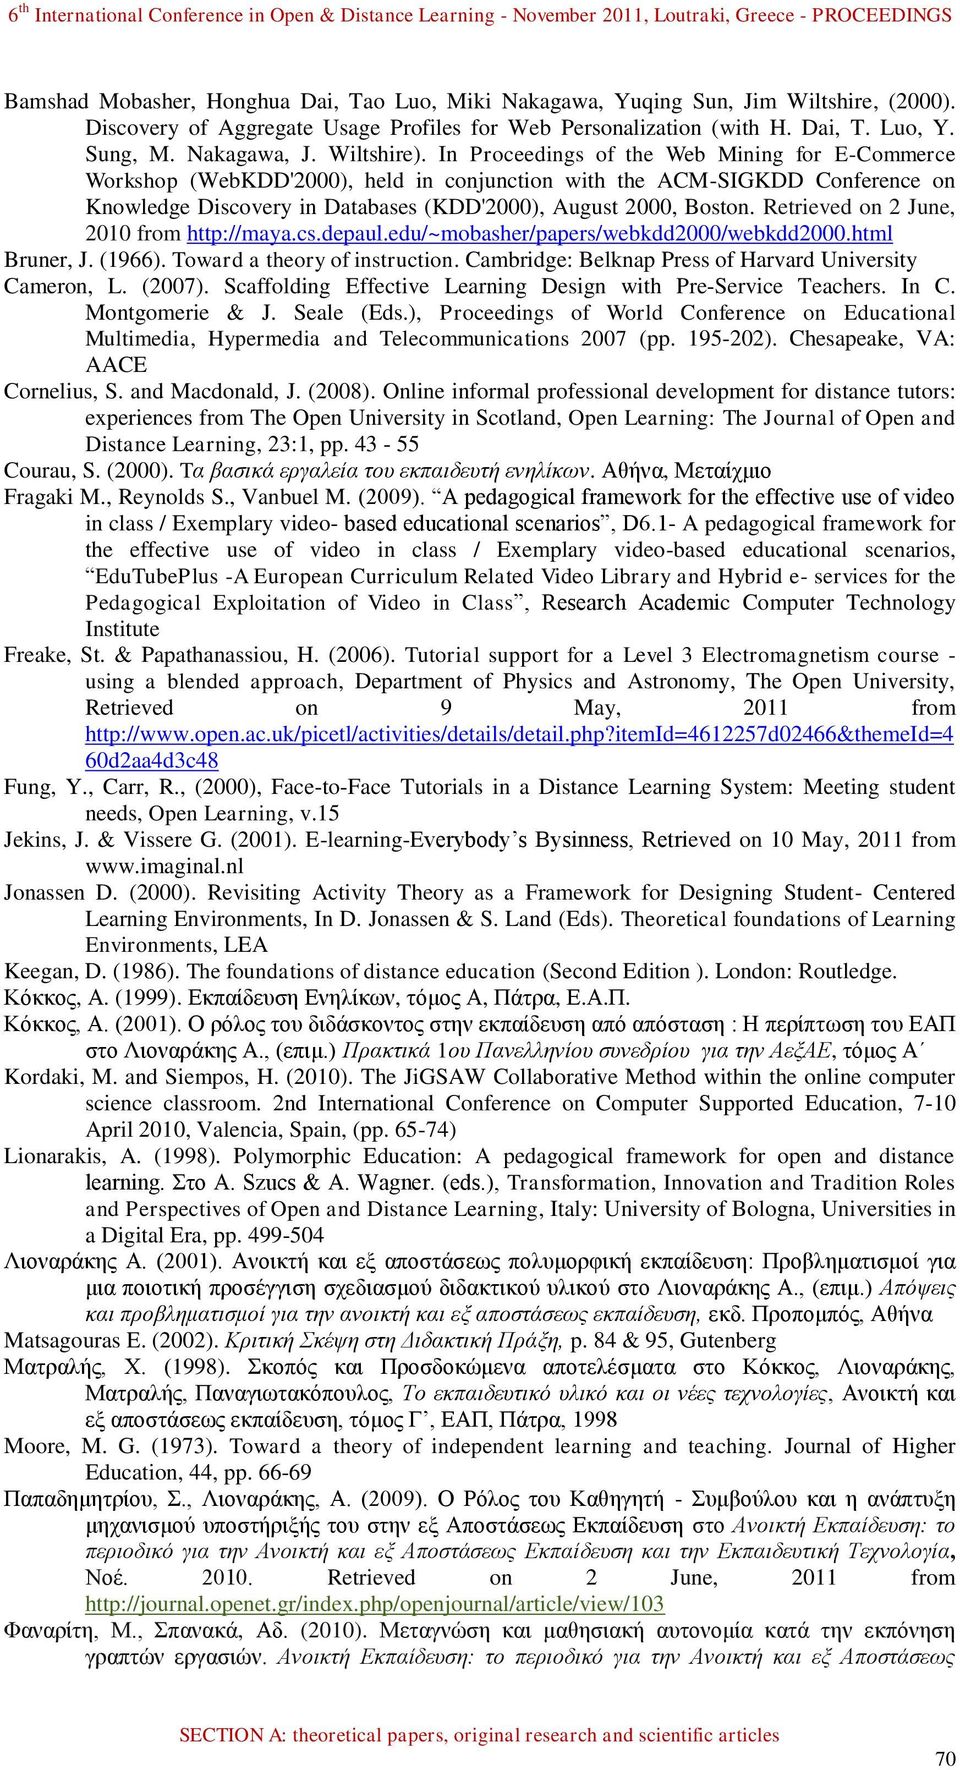 In Proceedings of the Web Mining for E-Commerce Workshop (WebKDD'2000), held in conjunction with the ACM-SIGKDD Conference on Knowledge Discovery in Databases (KDD'2000), August 2000, Boston.